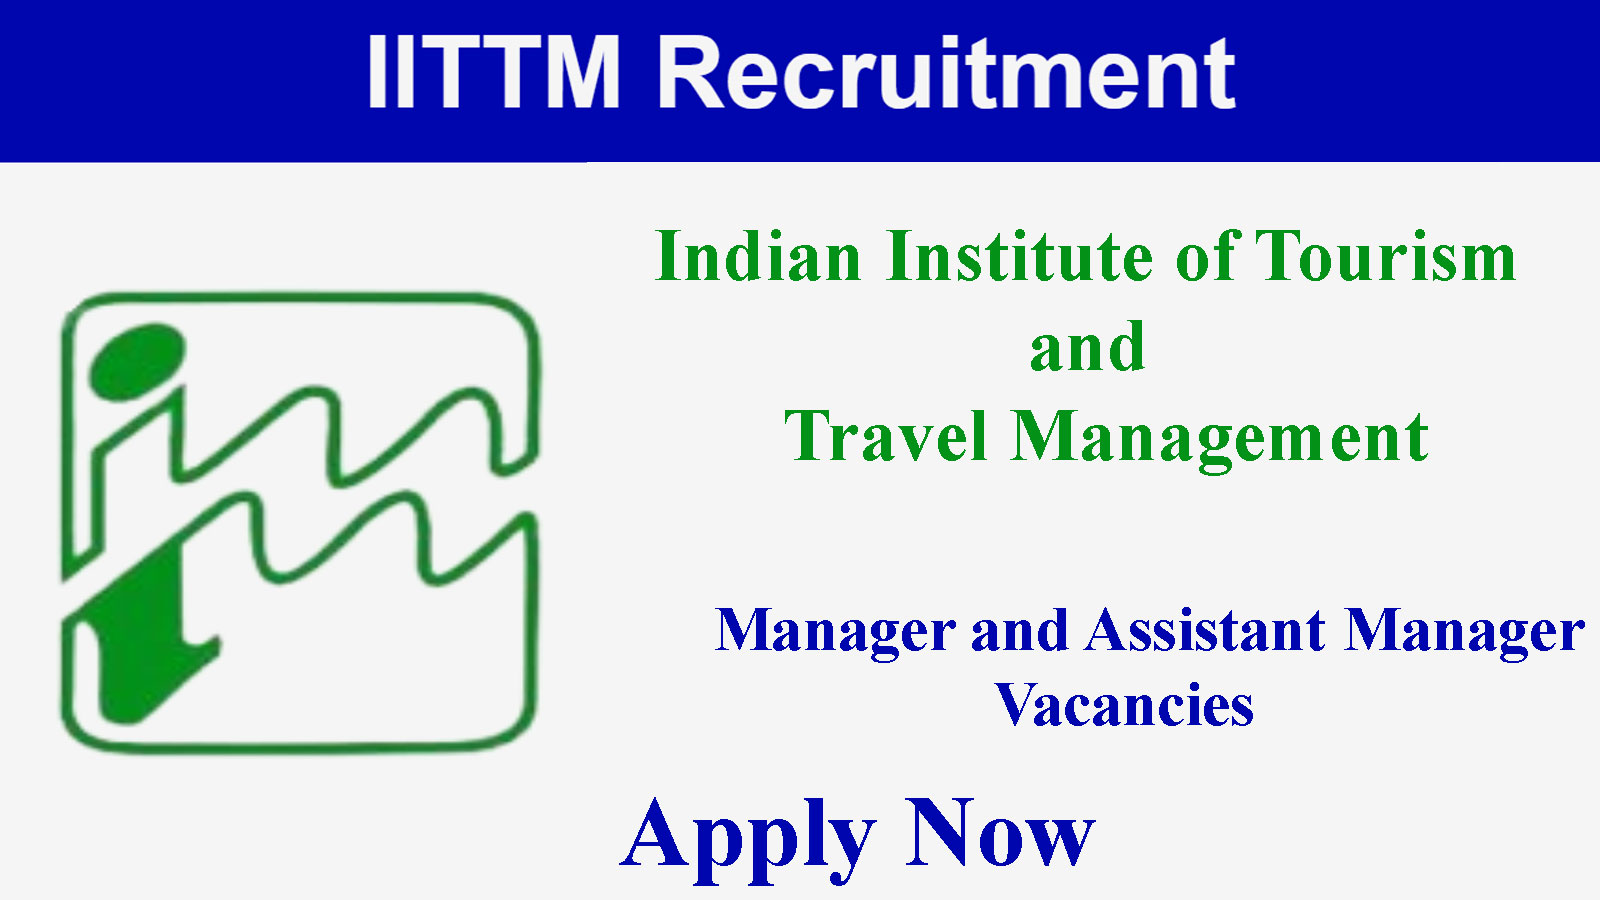 IITTM Recruitment for Manager and Assistant Manager Posts